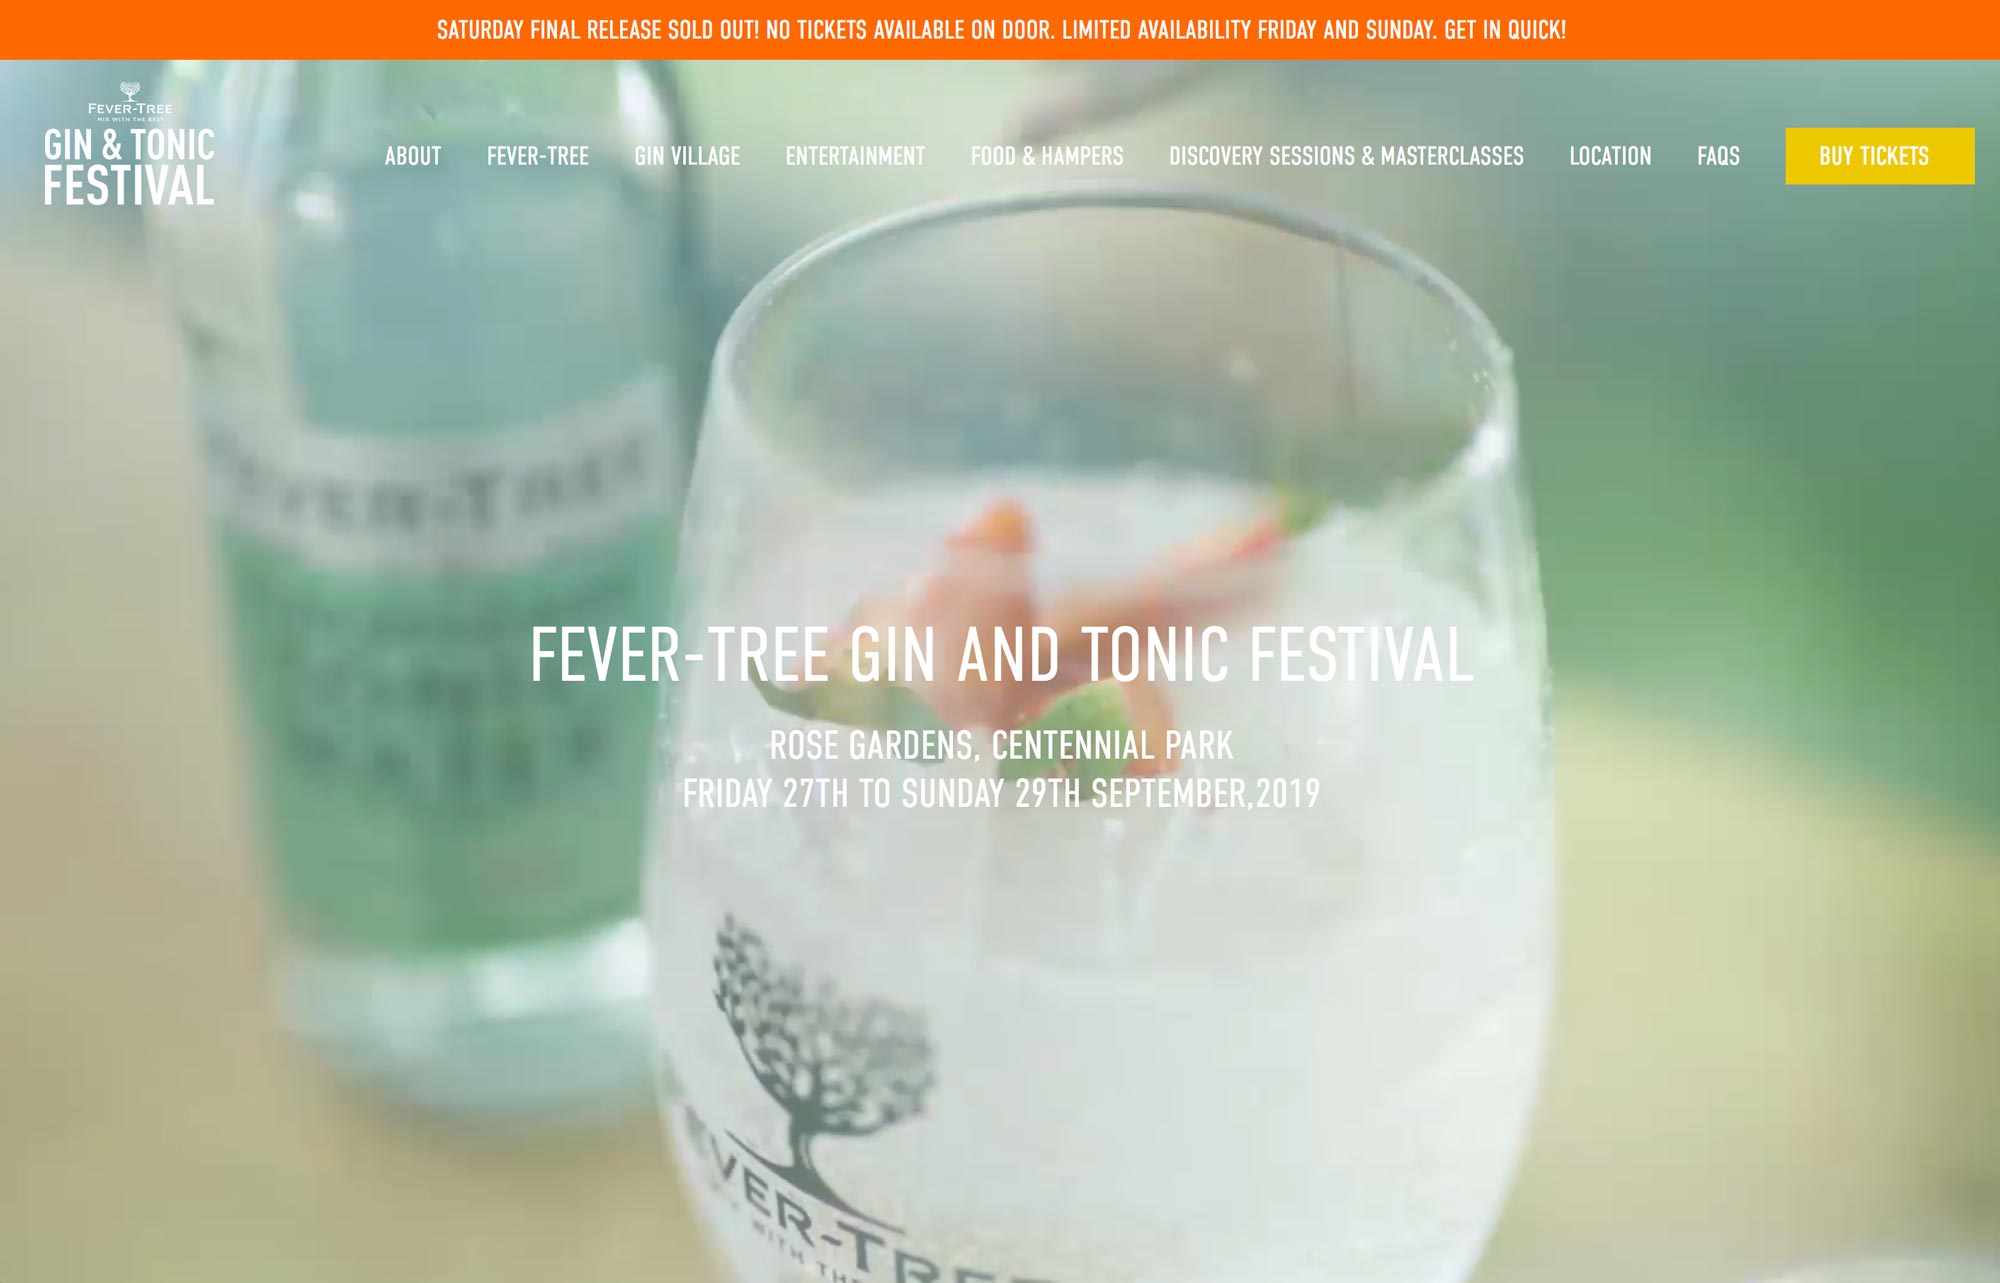 Fever-Tree Full Screen Background Video with Top Bar